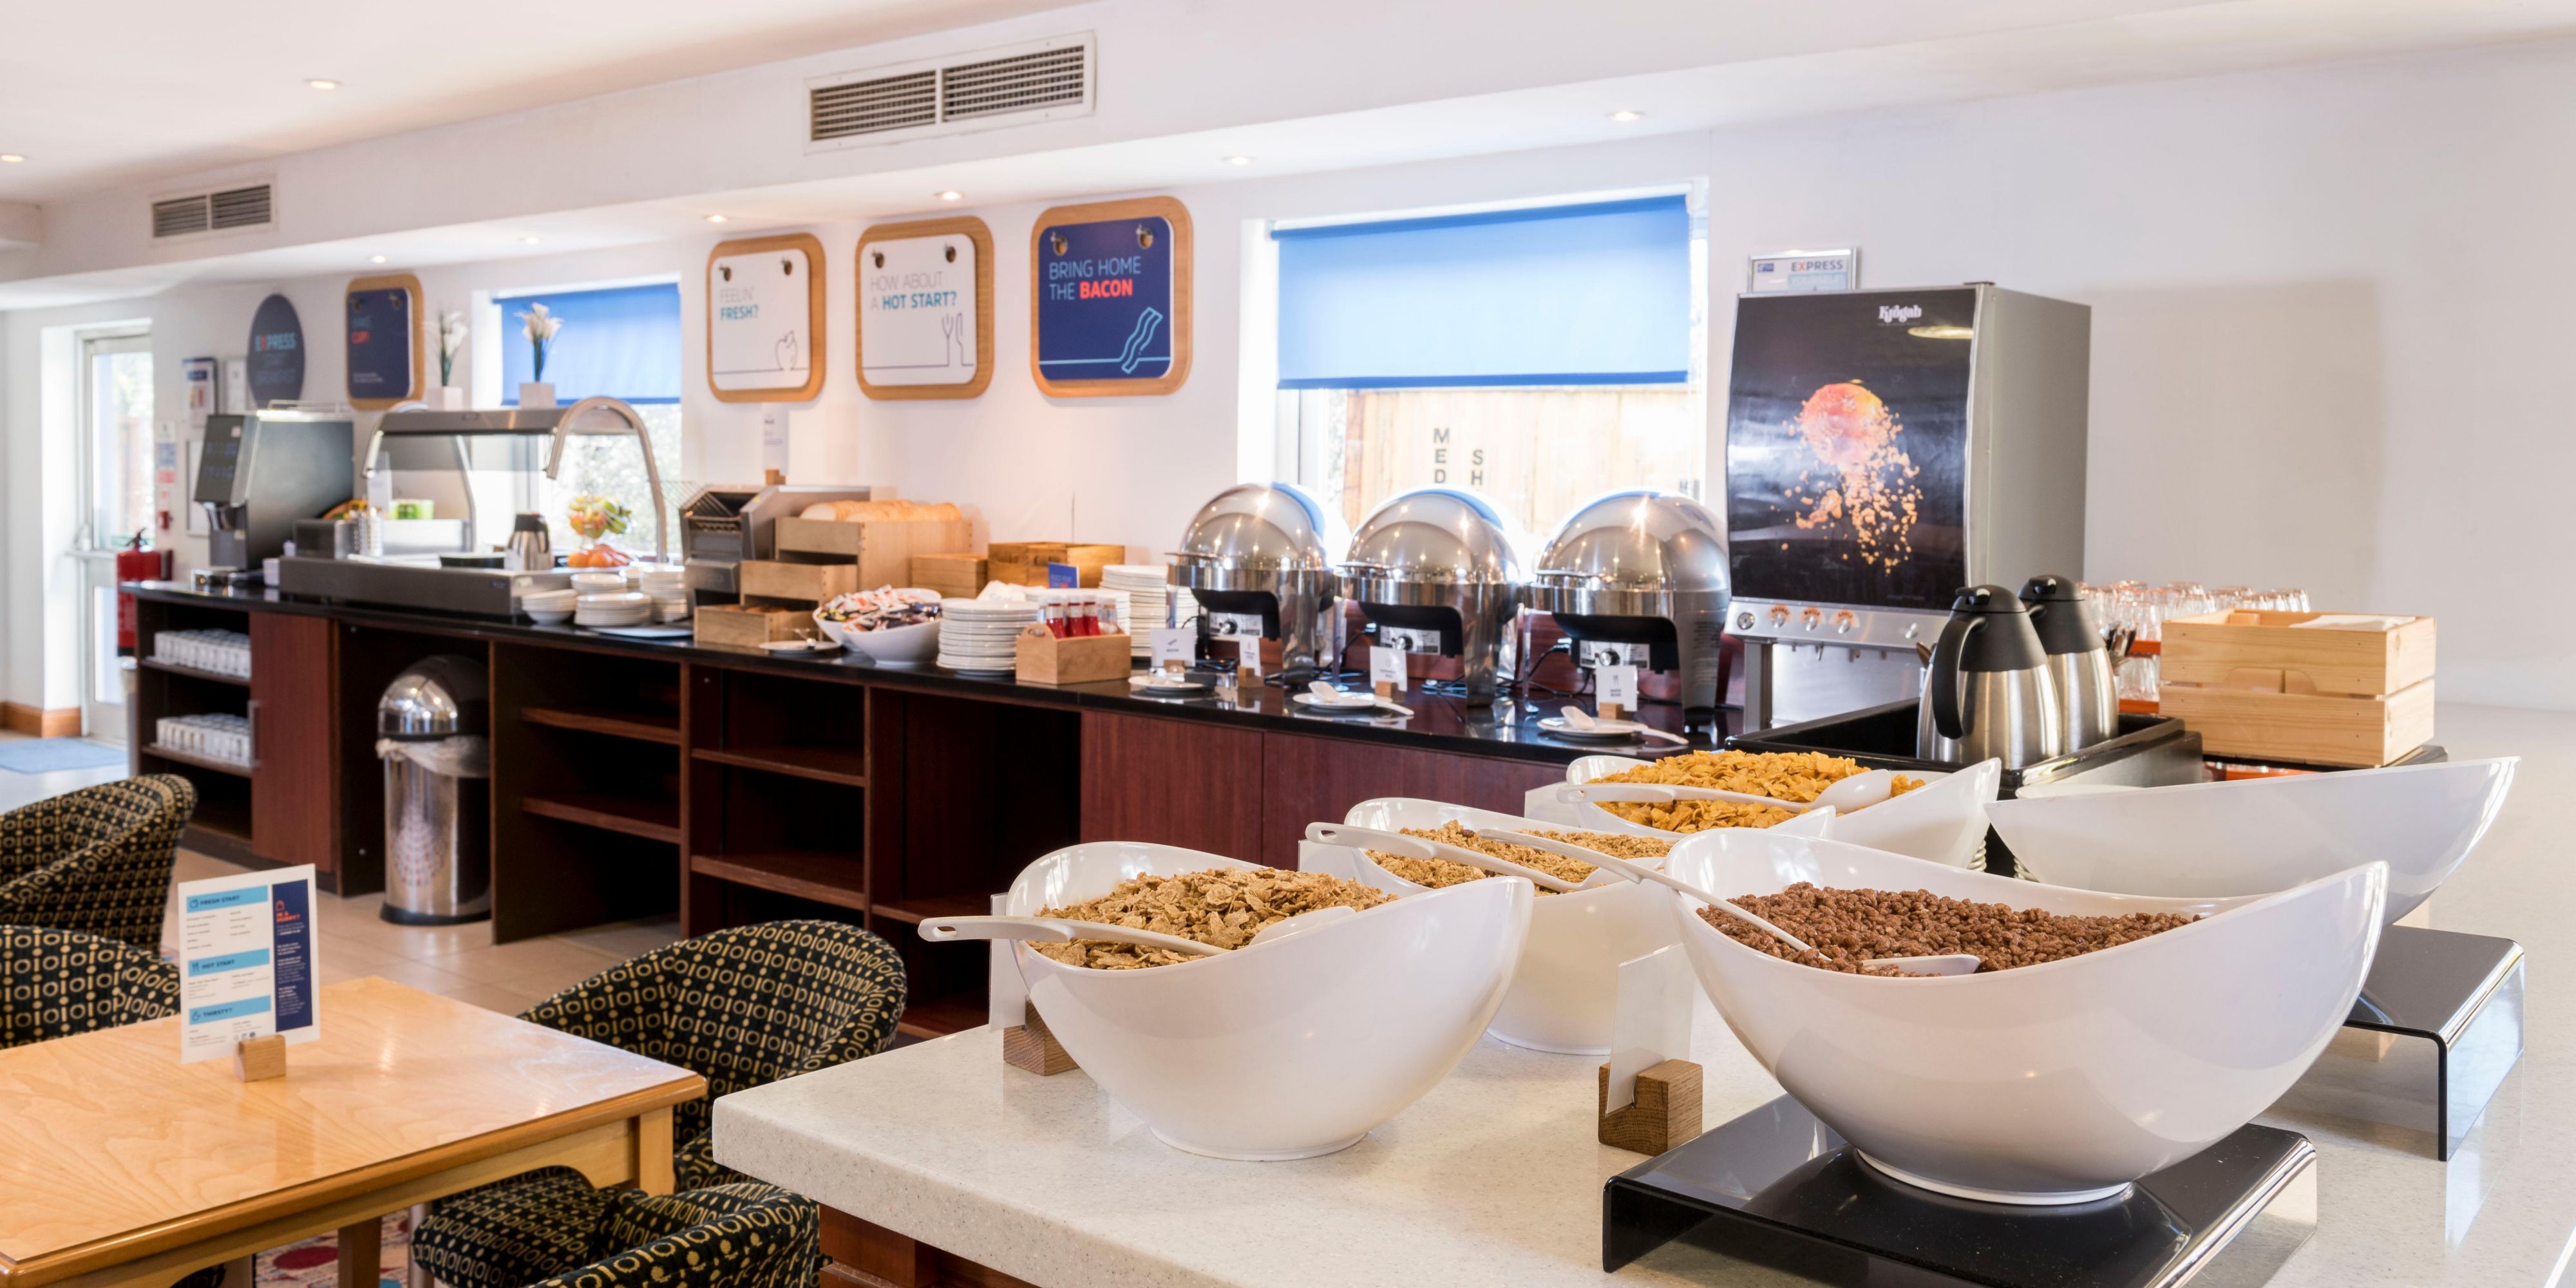 Here at Holiday Inn Express Birmingham Star City, we're committed to providing all our guests with a great start to the day with a special Express Start Breakfast.